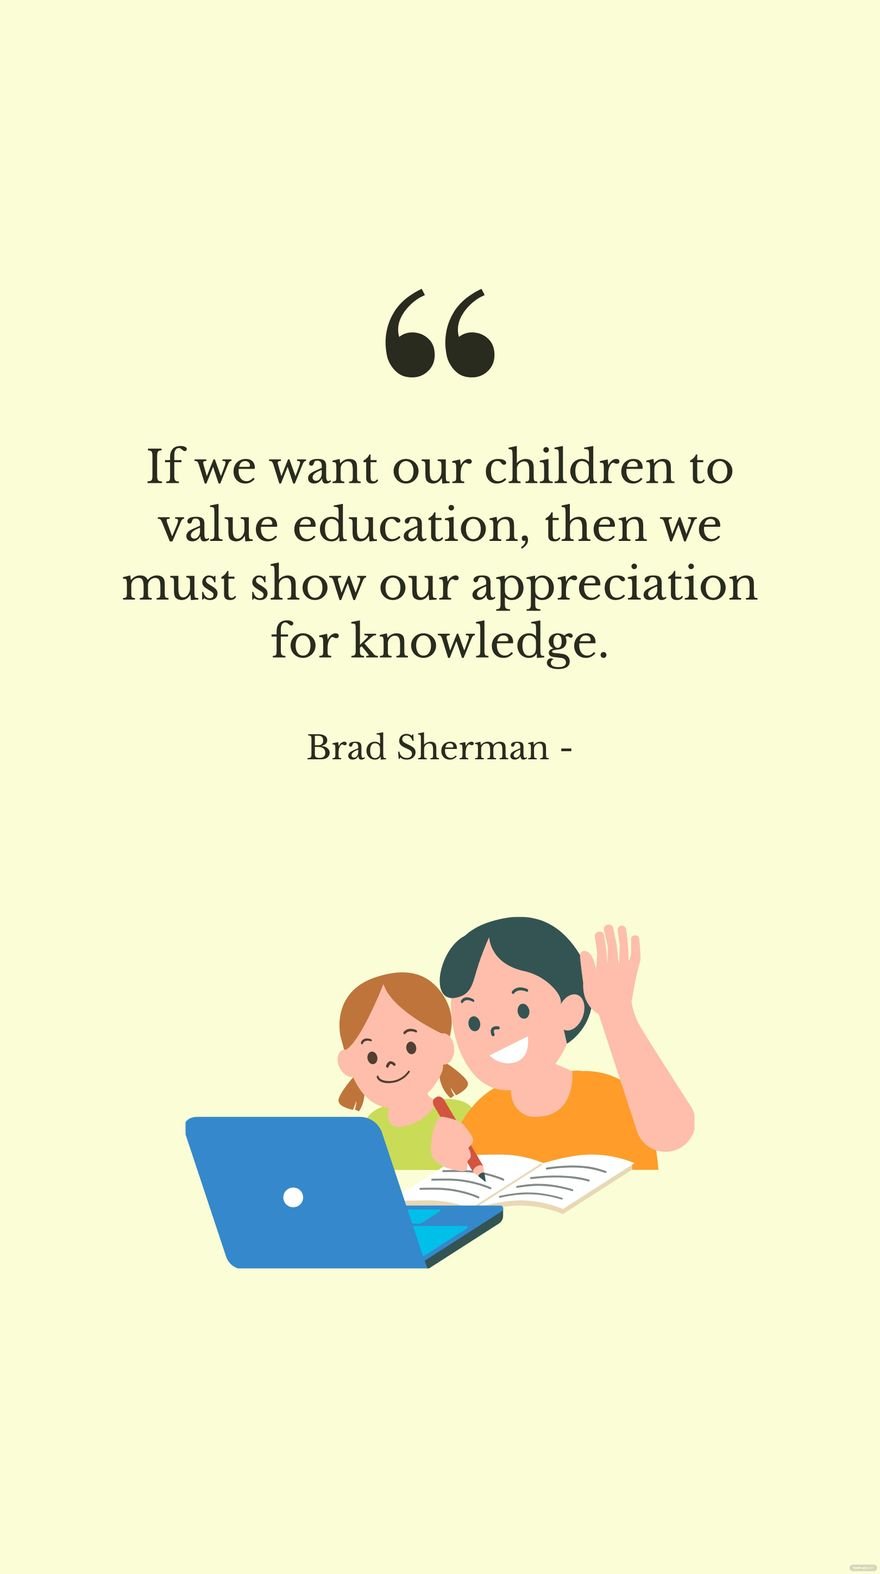 Brad Sherman - If we want our children to value education, then we must show our appreciation for knowledge.